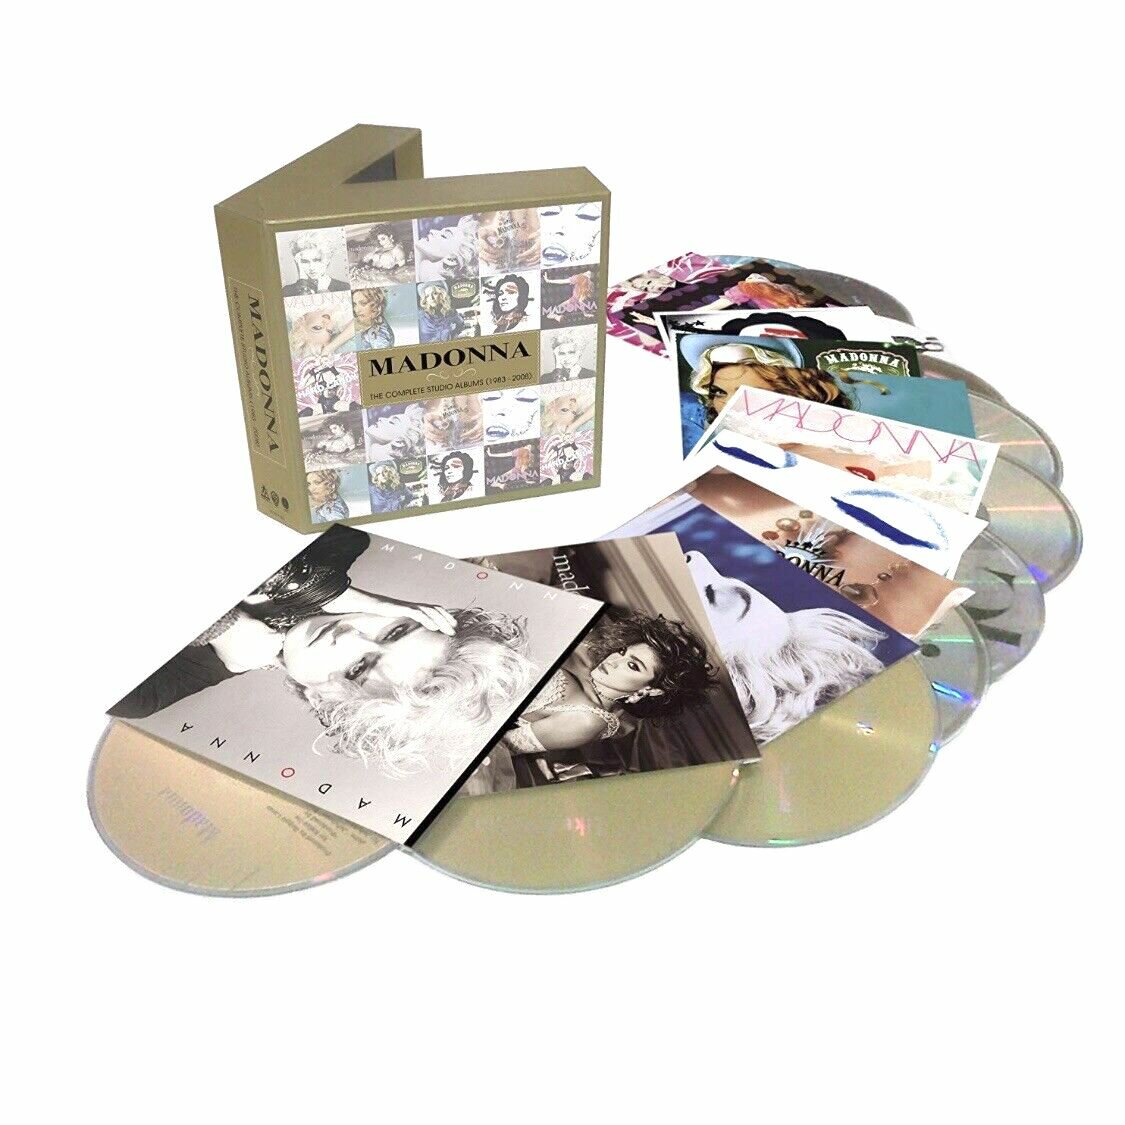 Madonna The Complete Studio Albums (1983-2008) CD Медиа - фото №2